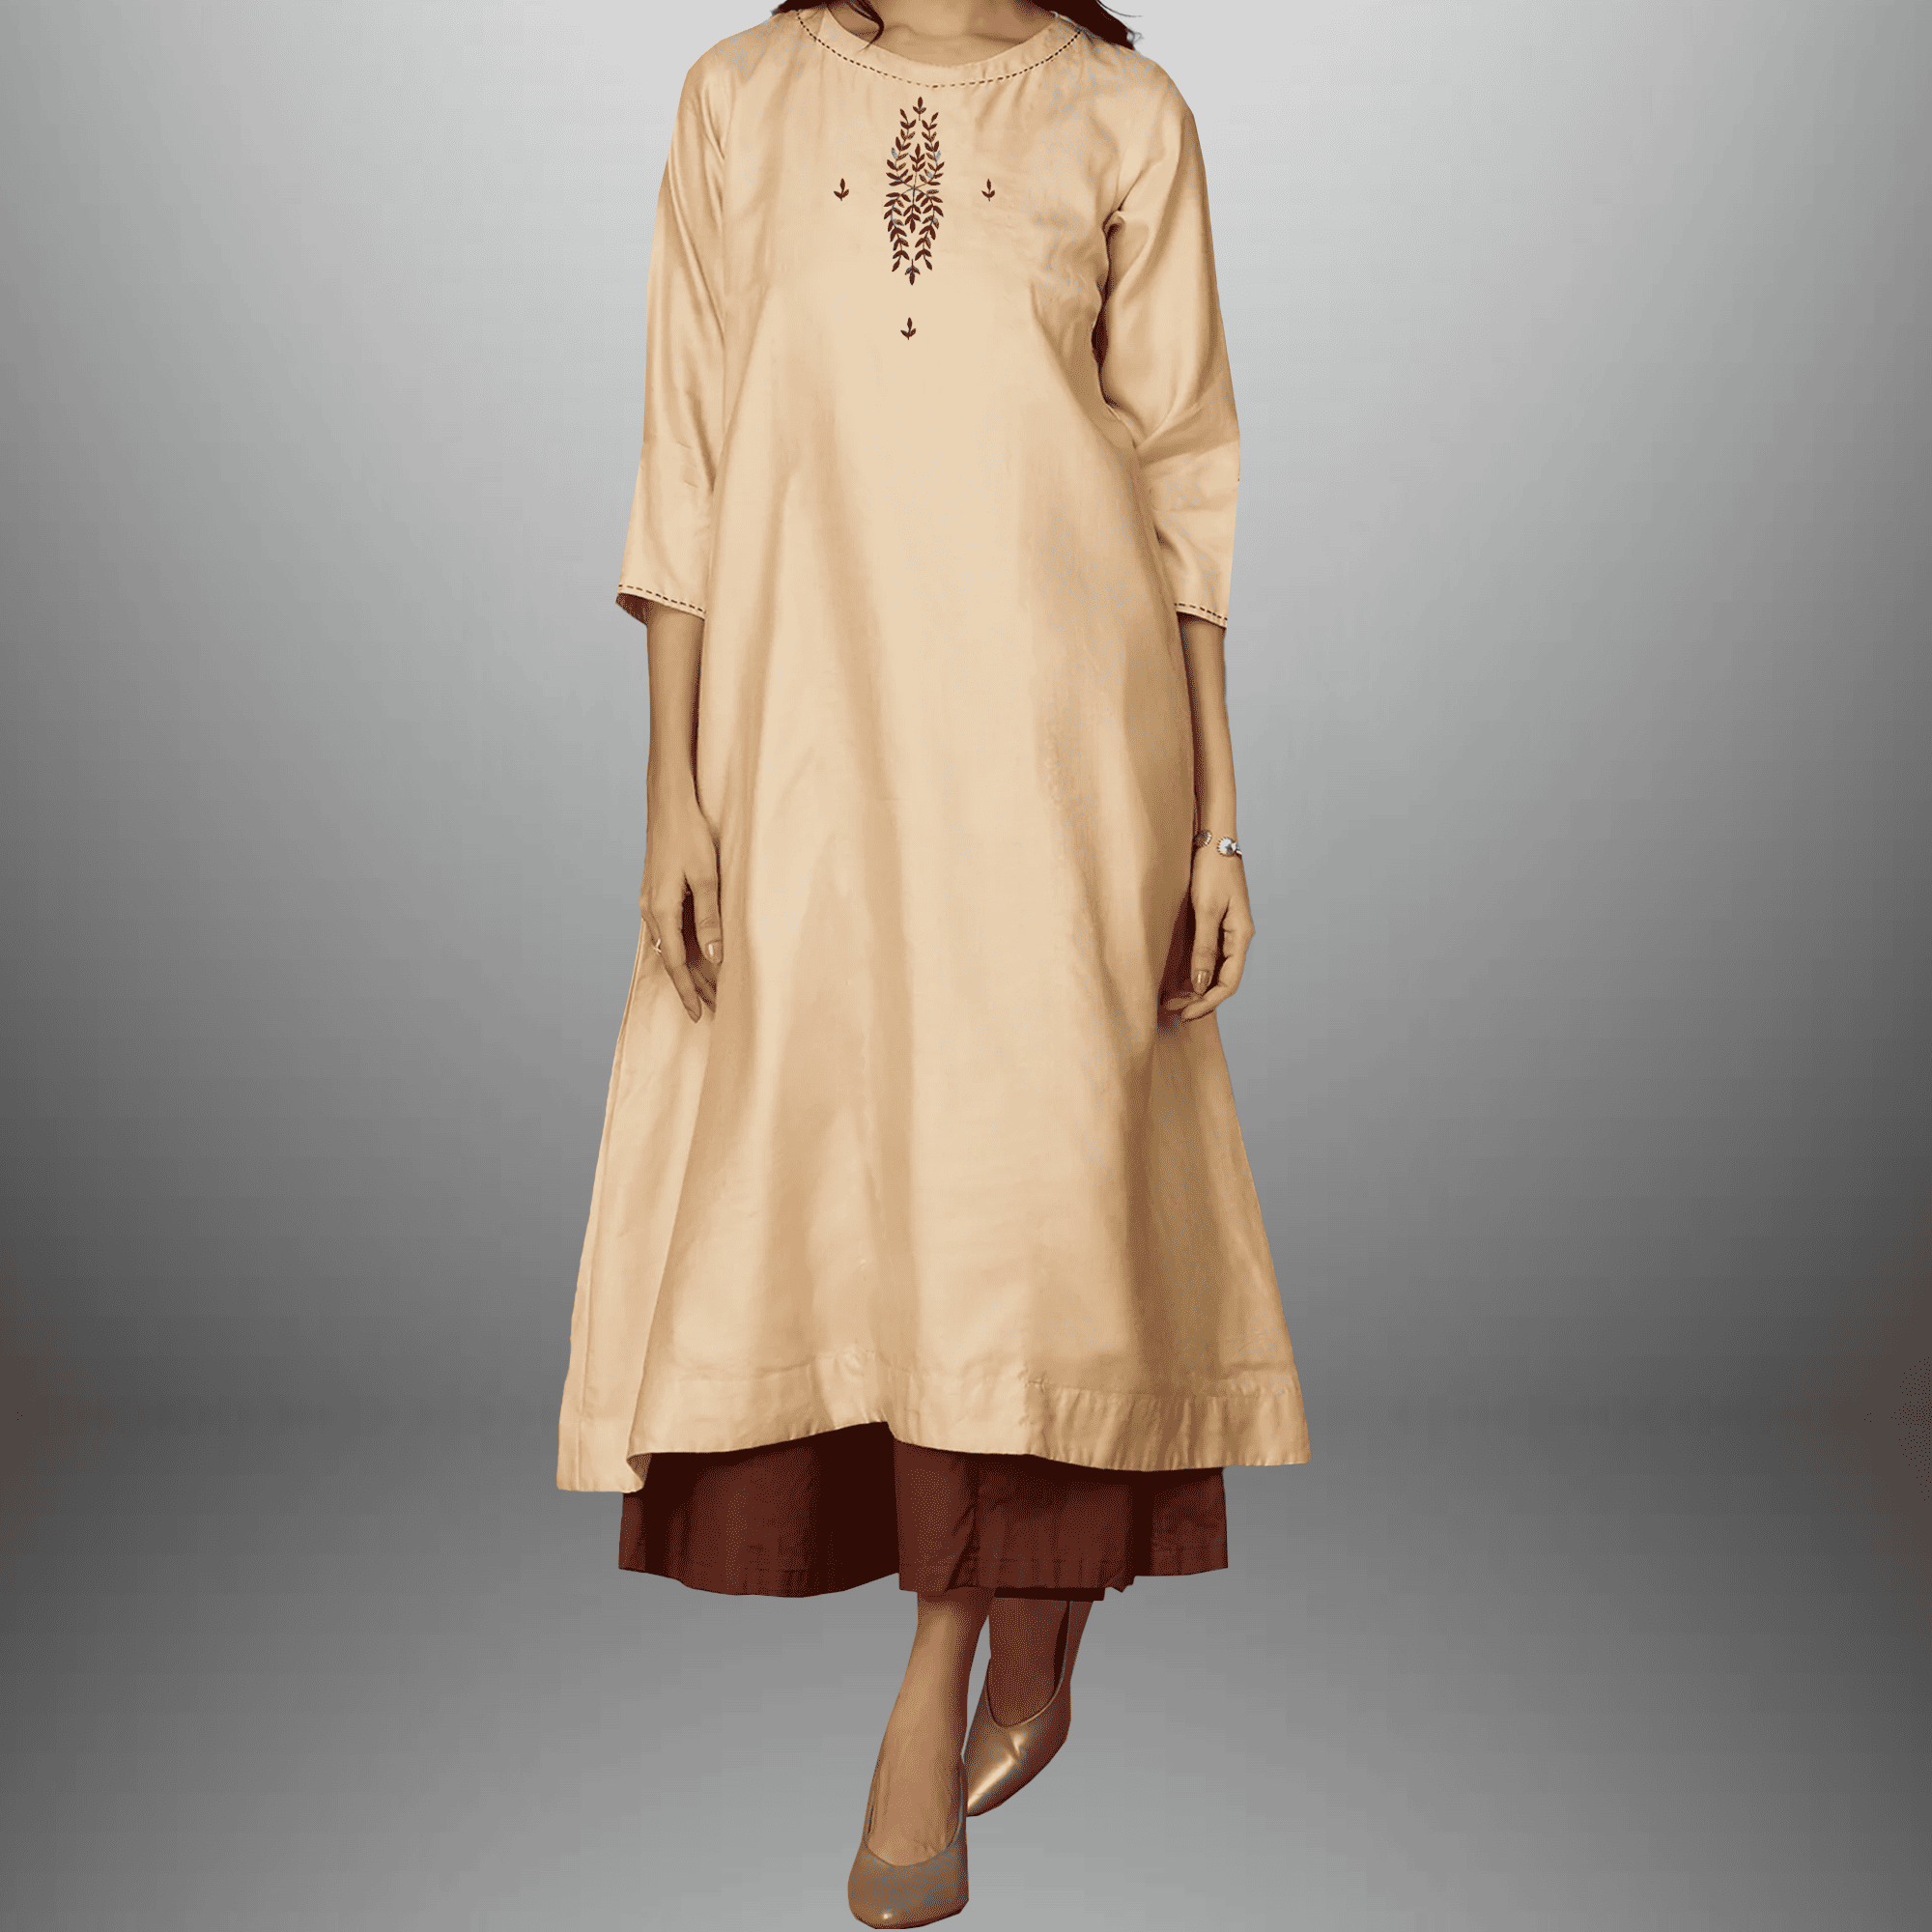 Women's Beige Kurti with Embroidery work on Top and Brown Palazzo-RWKS082